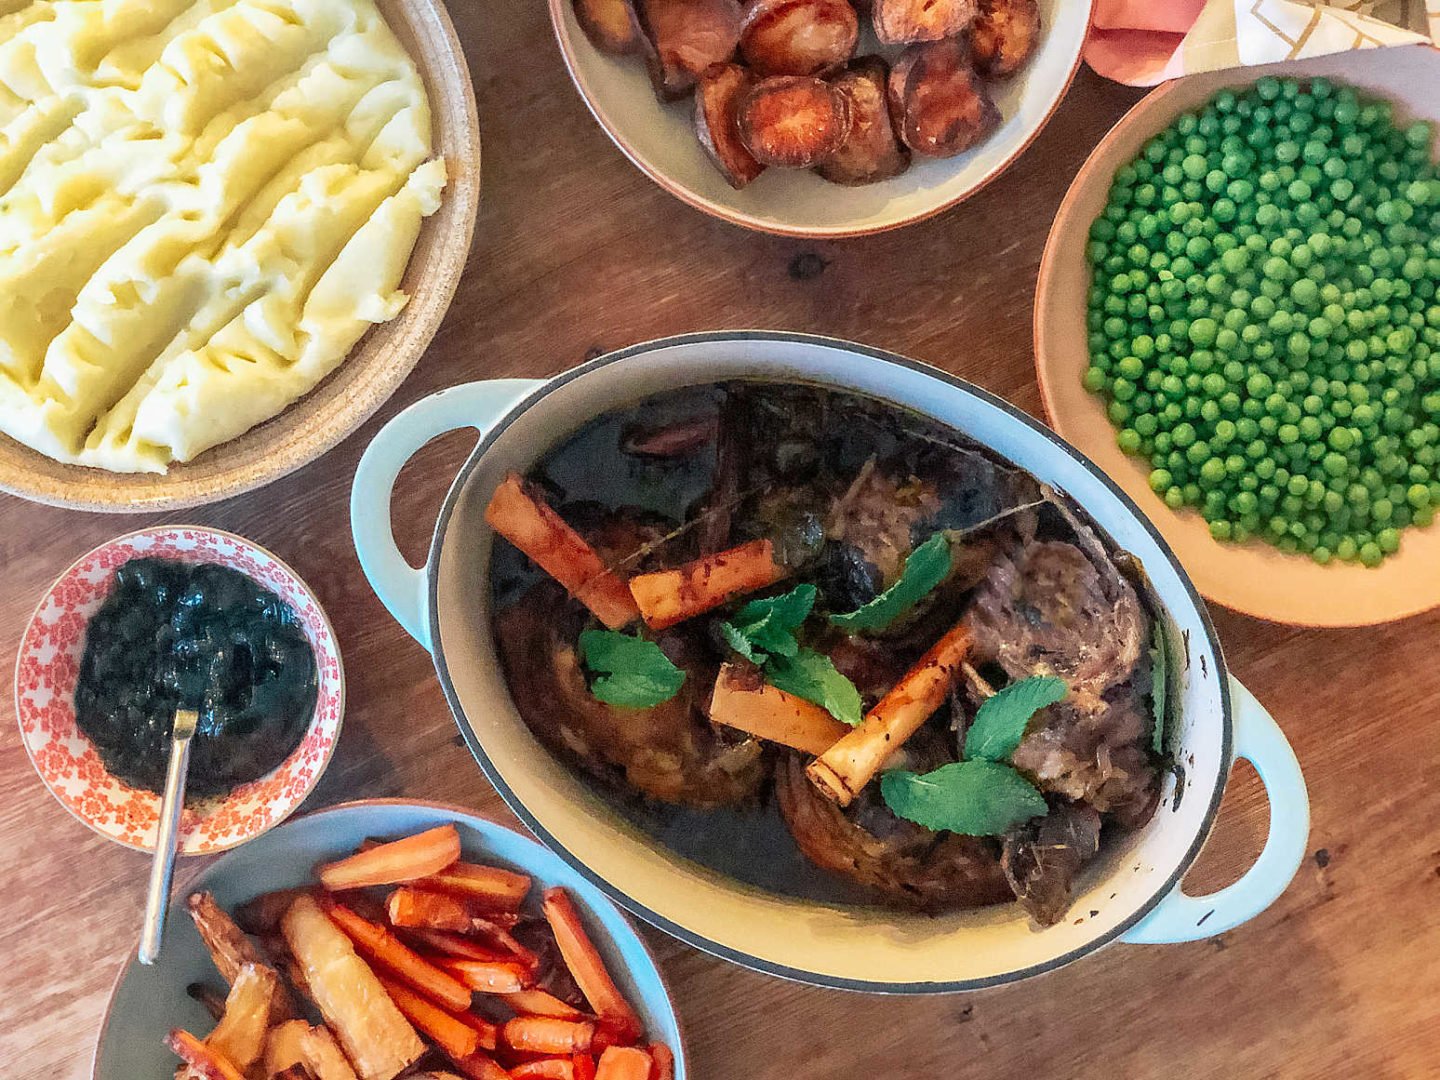 Minted slow cooker lamb shank with peas